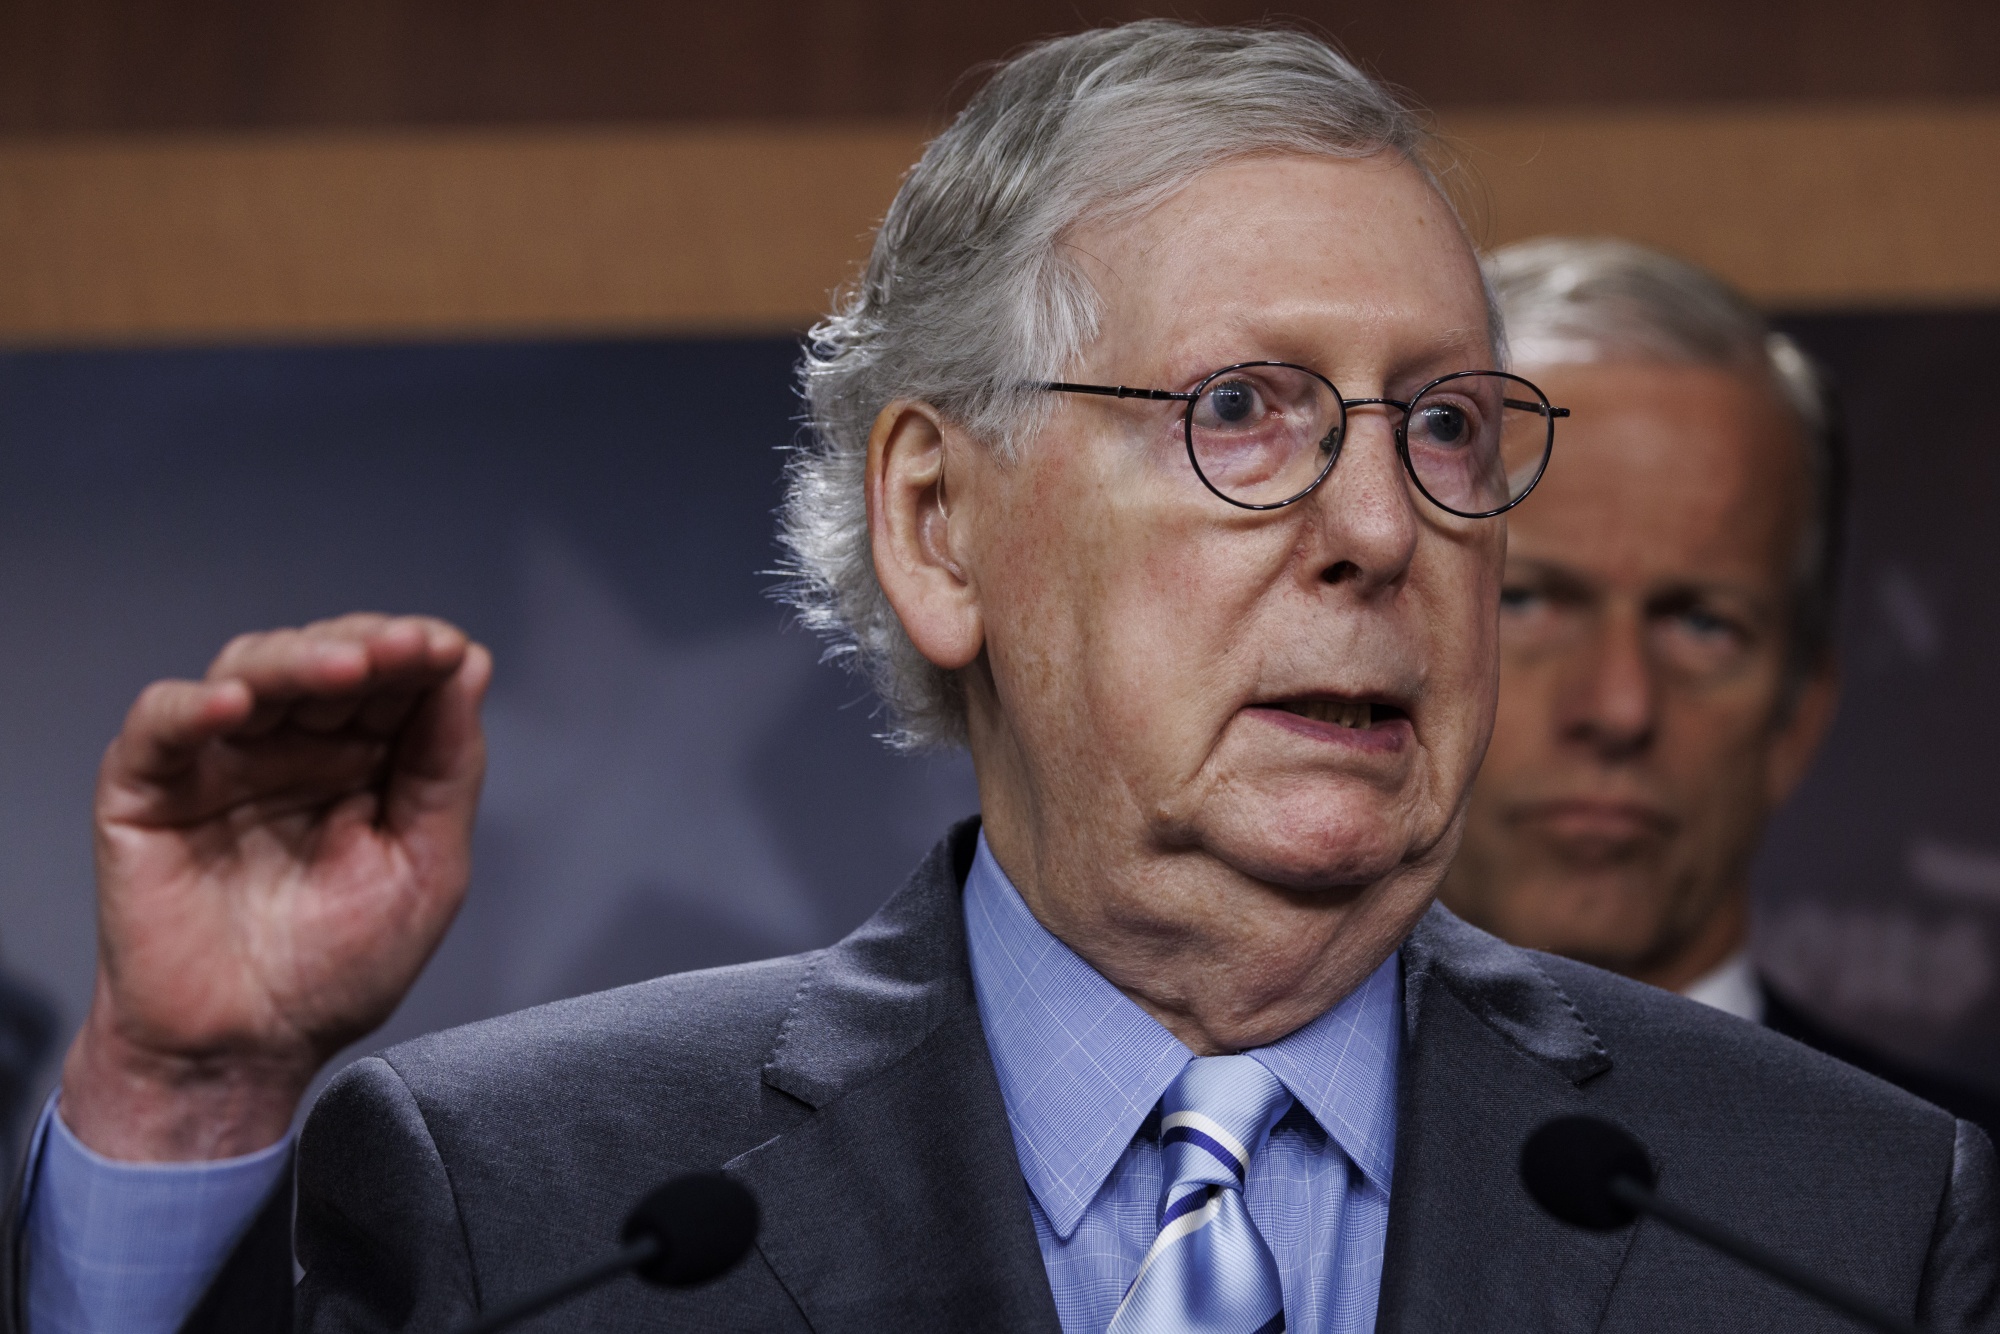 Mitch McConnell Is 'Chomping at the Bit' to Return to US Senate